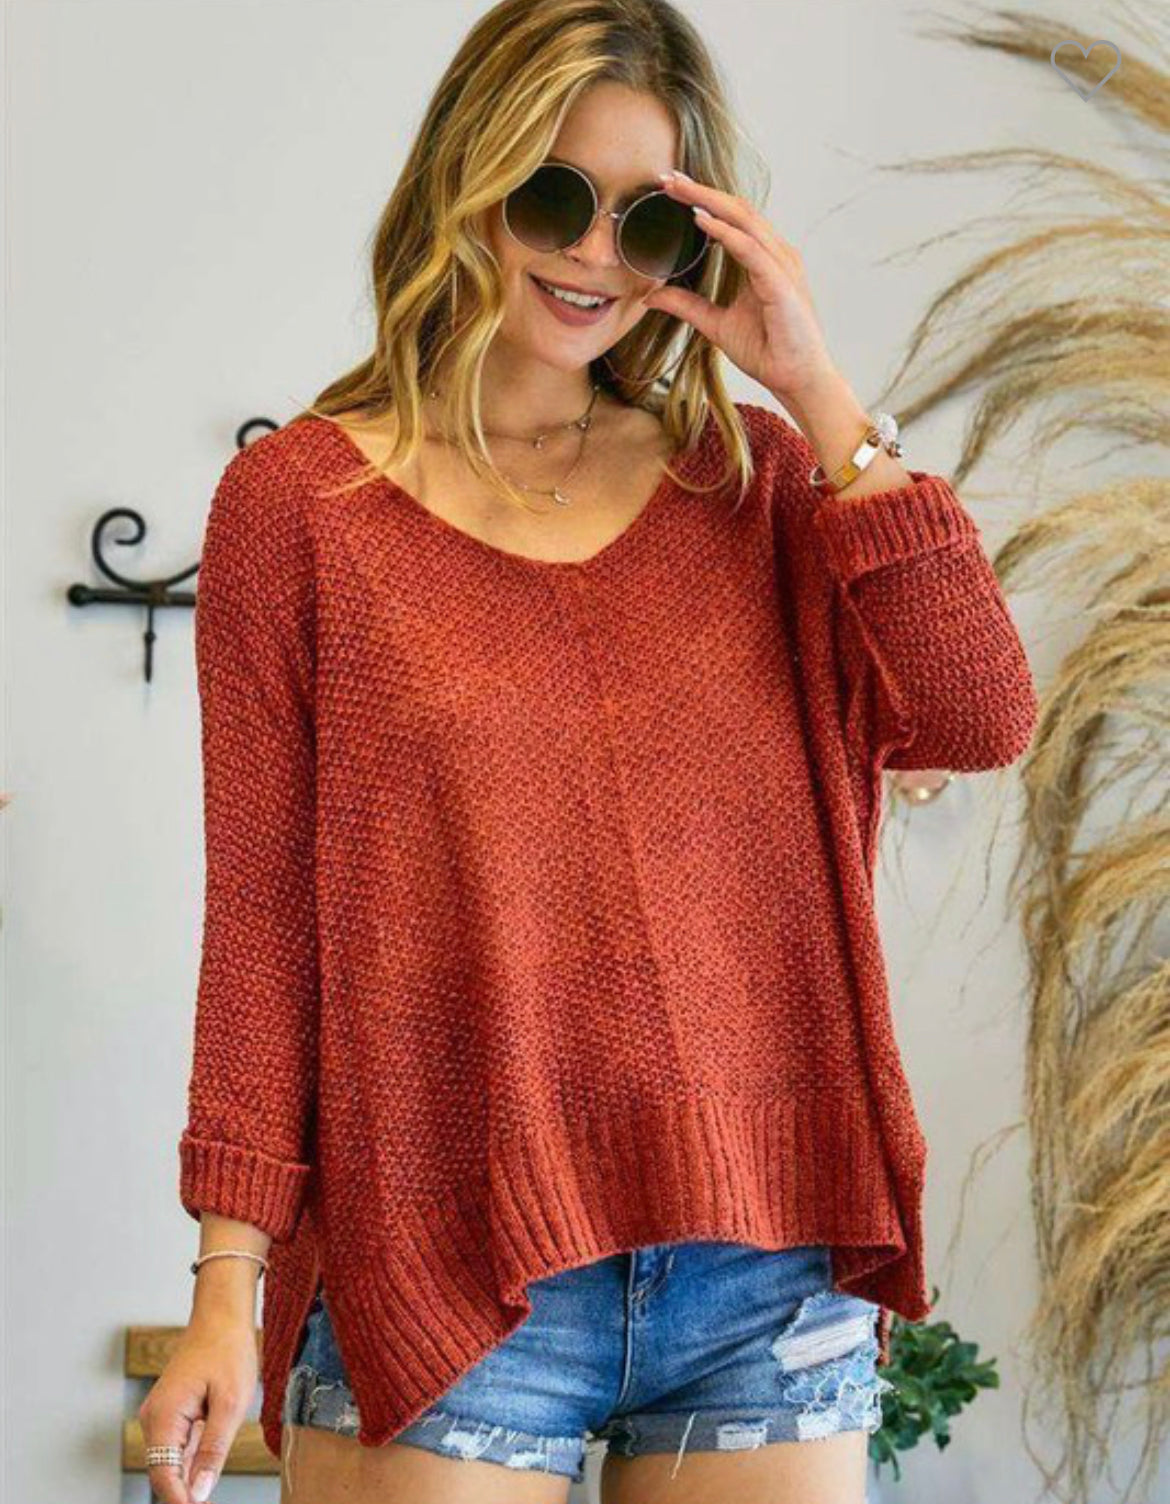 The Willow Crochet Sweater in Rust